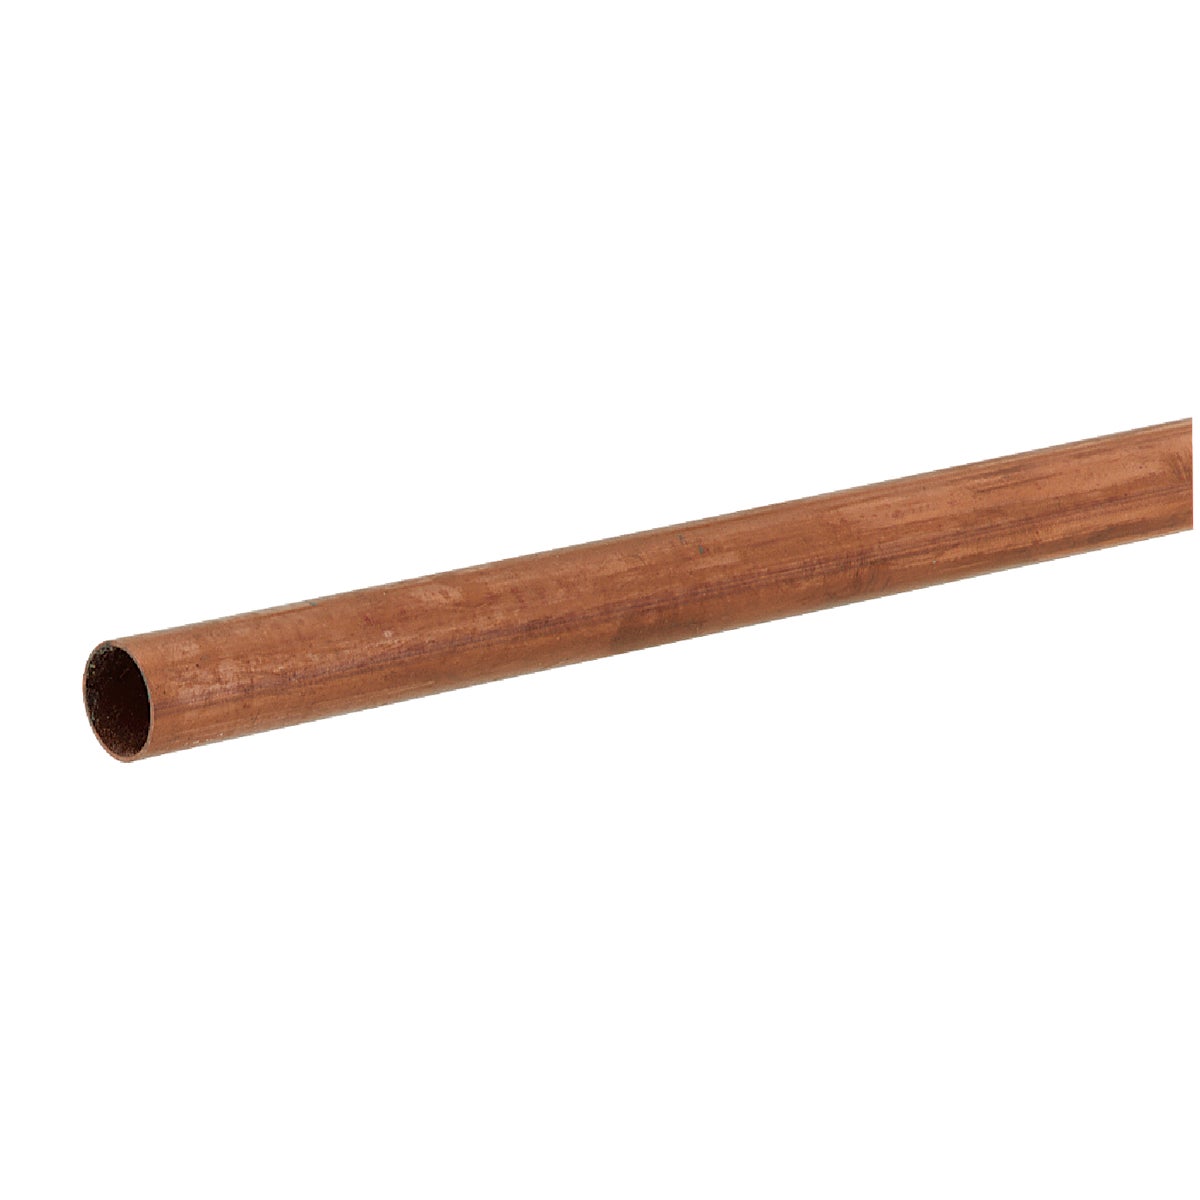 Item 416749, Straight length copper water pipe. 99% pure copper. I.D.